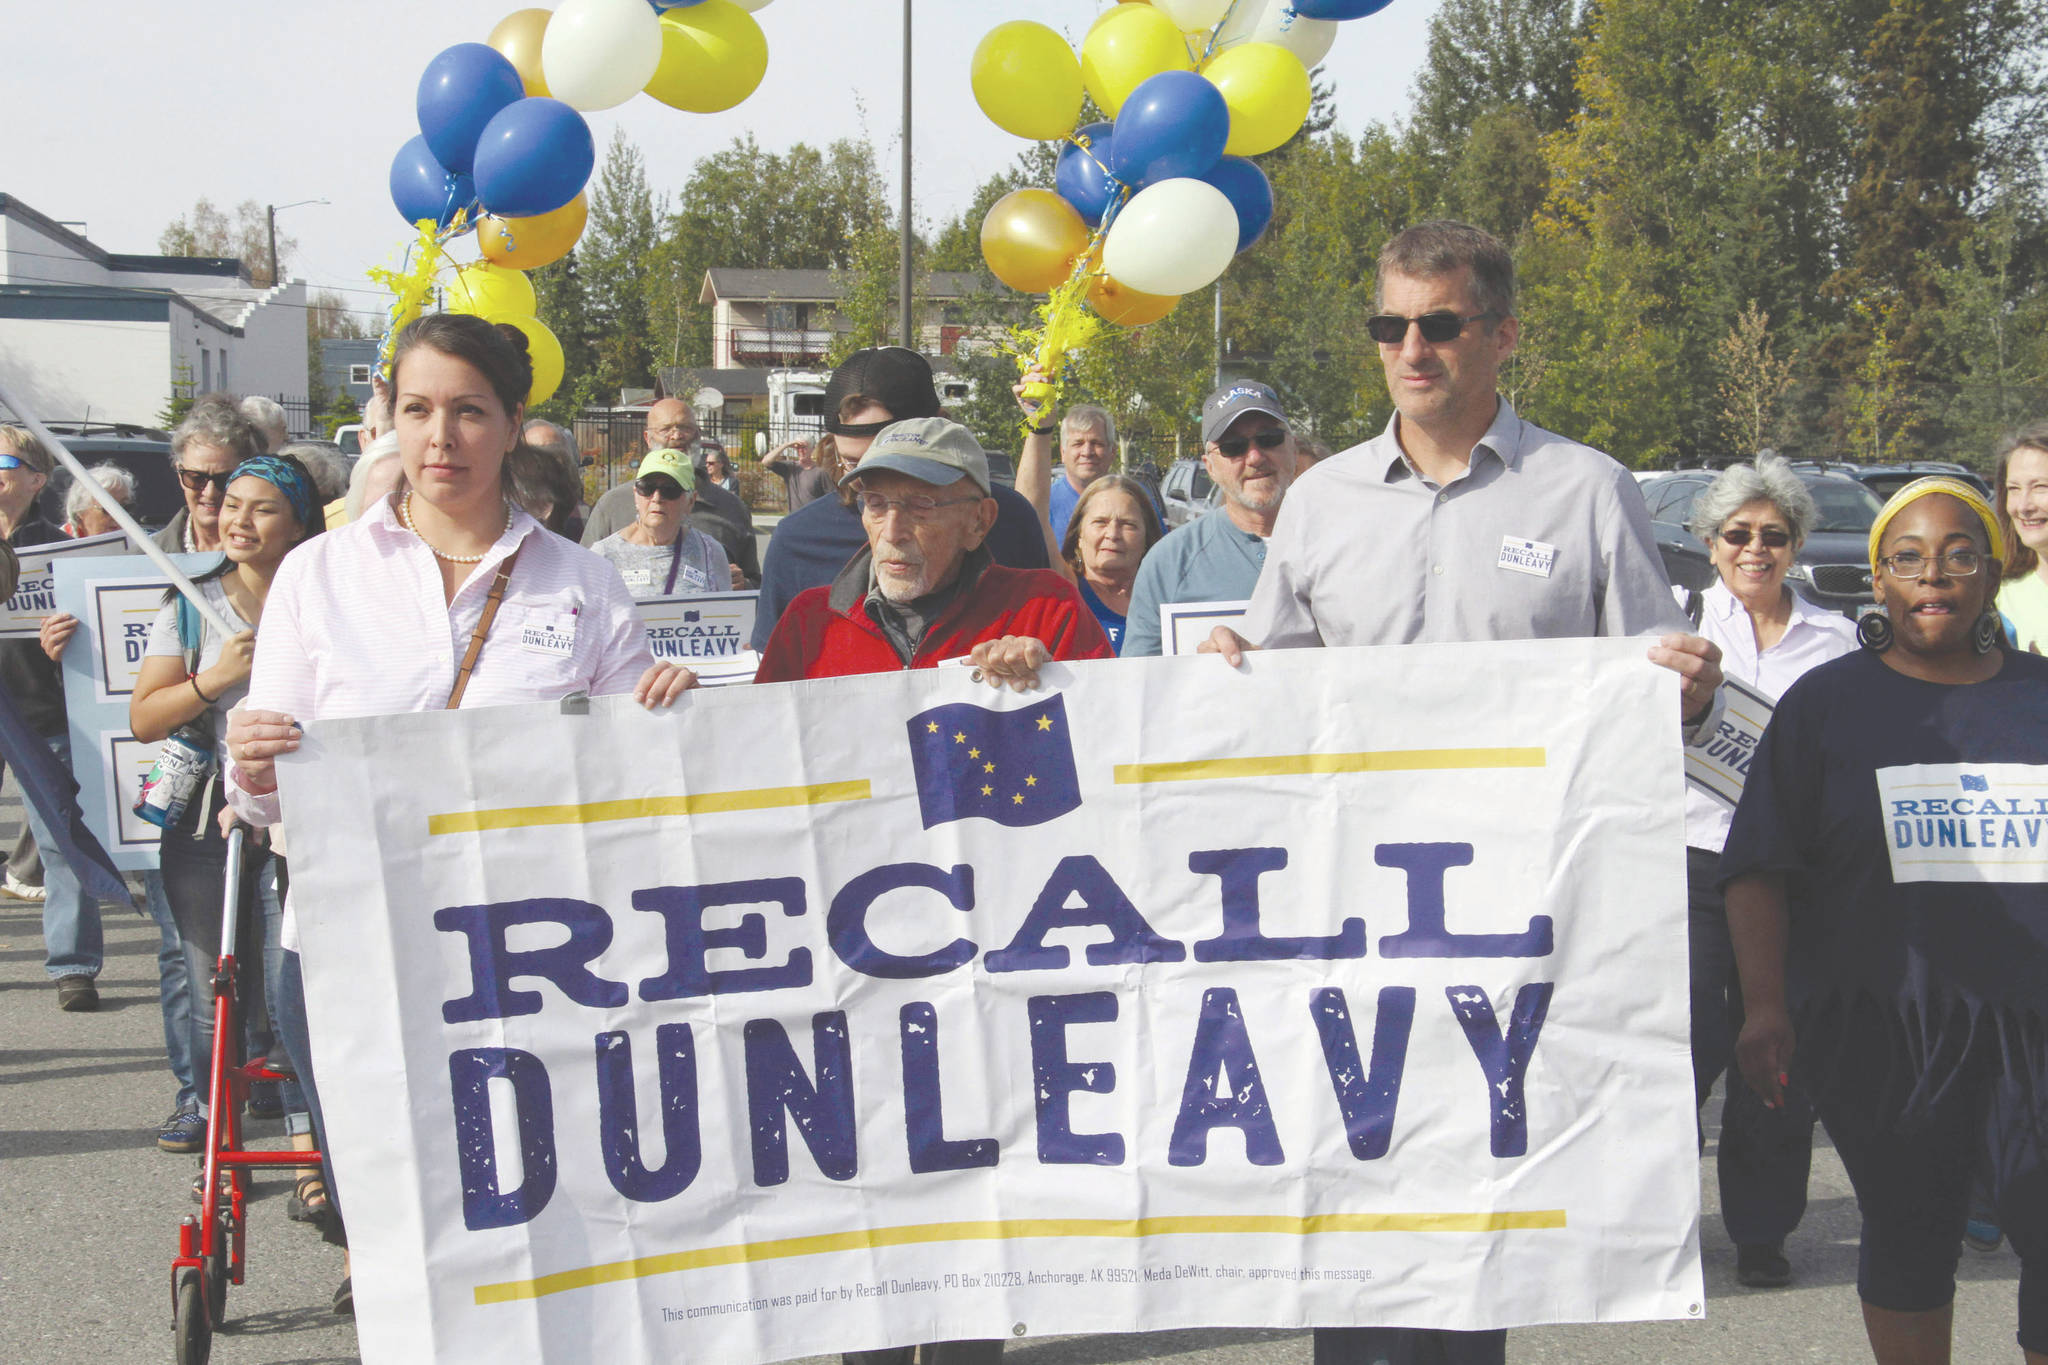 In this Sept. 5, 2019, file photo, Meda DeWitt, left, Vic Fischer, middle, and Aaron Welterlen, leaders of an effort to recall Alaska Gov. Mike Dunleavy, lead about 50 volunteers in a march to the Alaska Division of Elections office in Anchorage, Alaska. The Alaska Supreme Court on Friday, Feb. 14, 2020 agreed to allow a group seeking to recall Gov. Mike Dunleavy to begin a second signature-gathering phase. (AP Photo/Mark Thiessen, File)